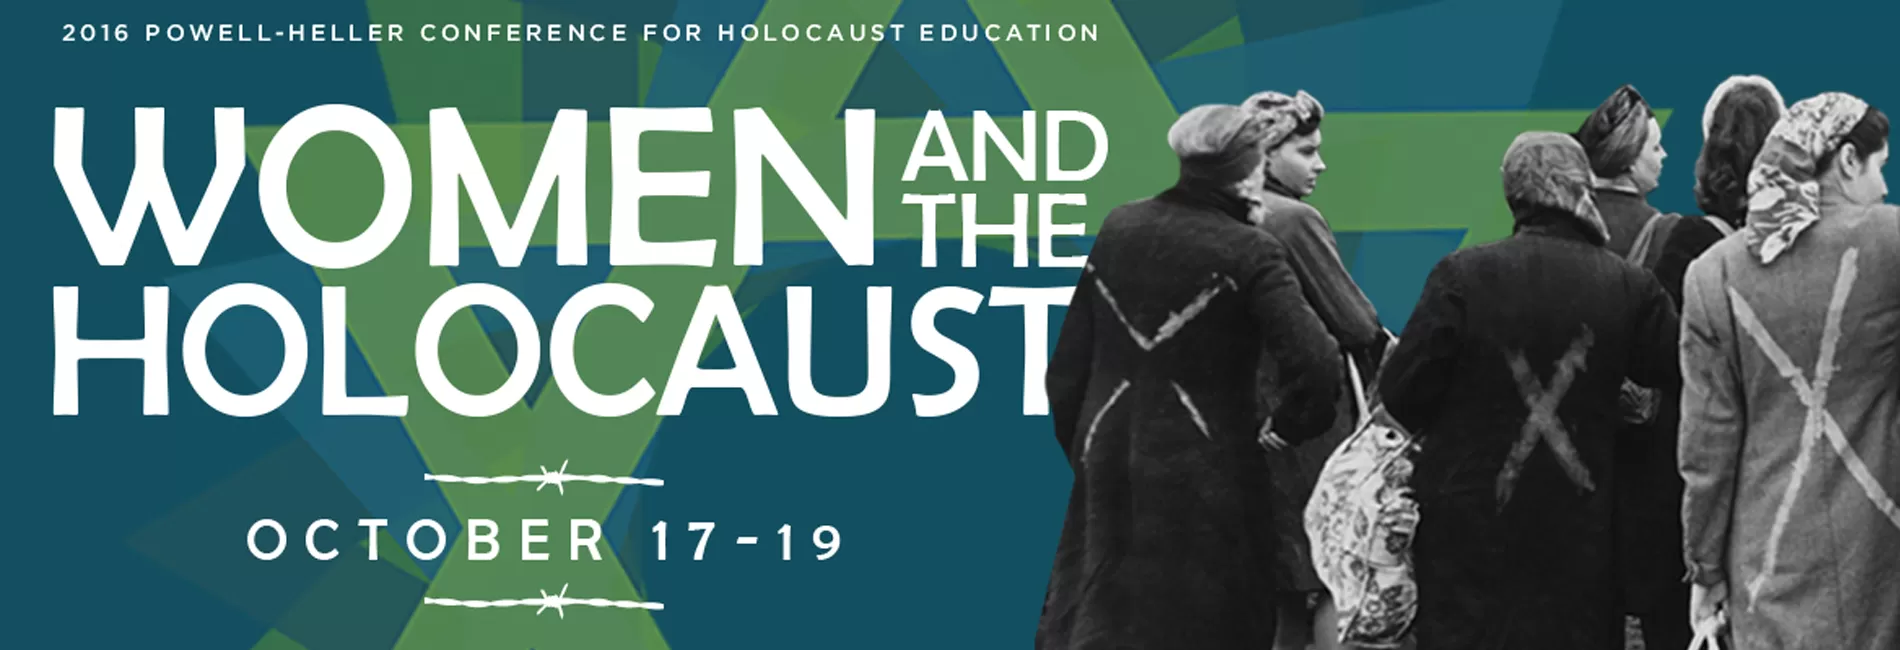 MOR performs at Powell-Heller Conference: "Women and the Holocaust"